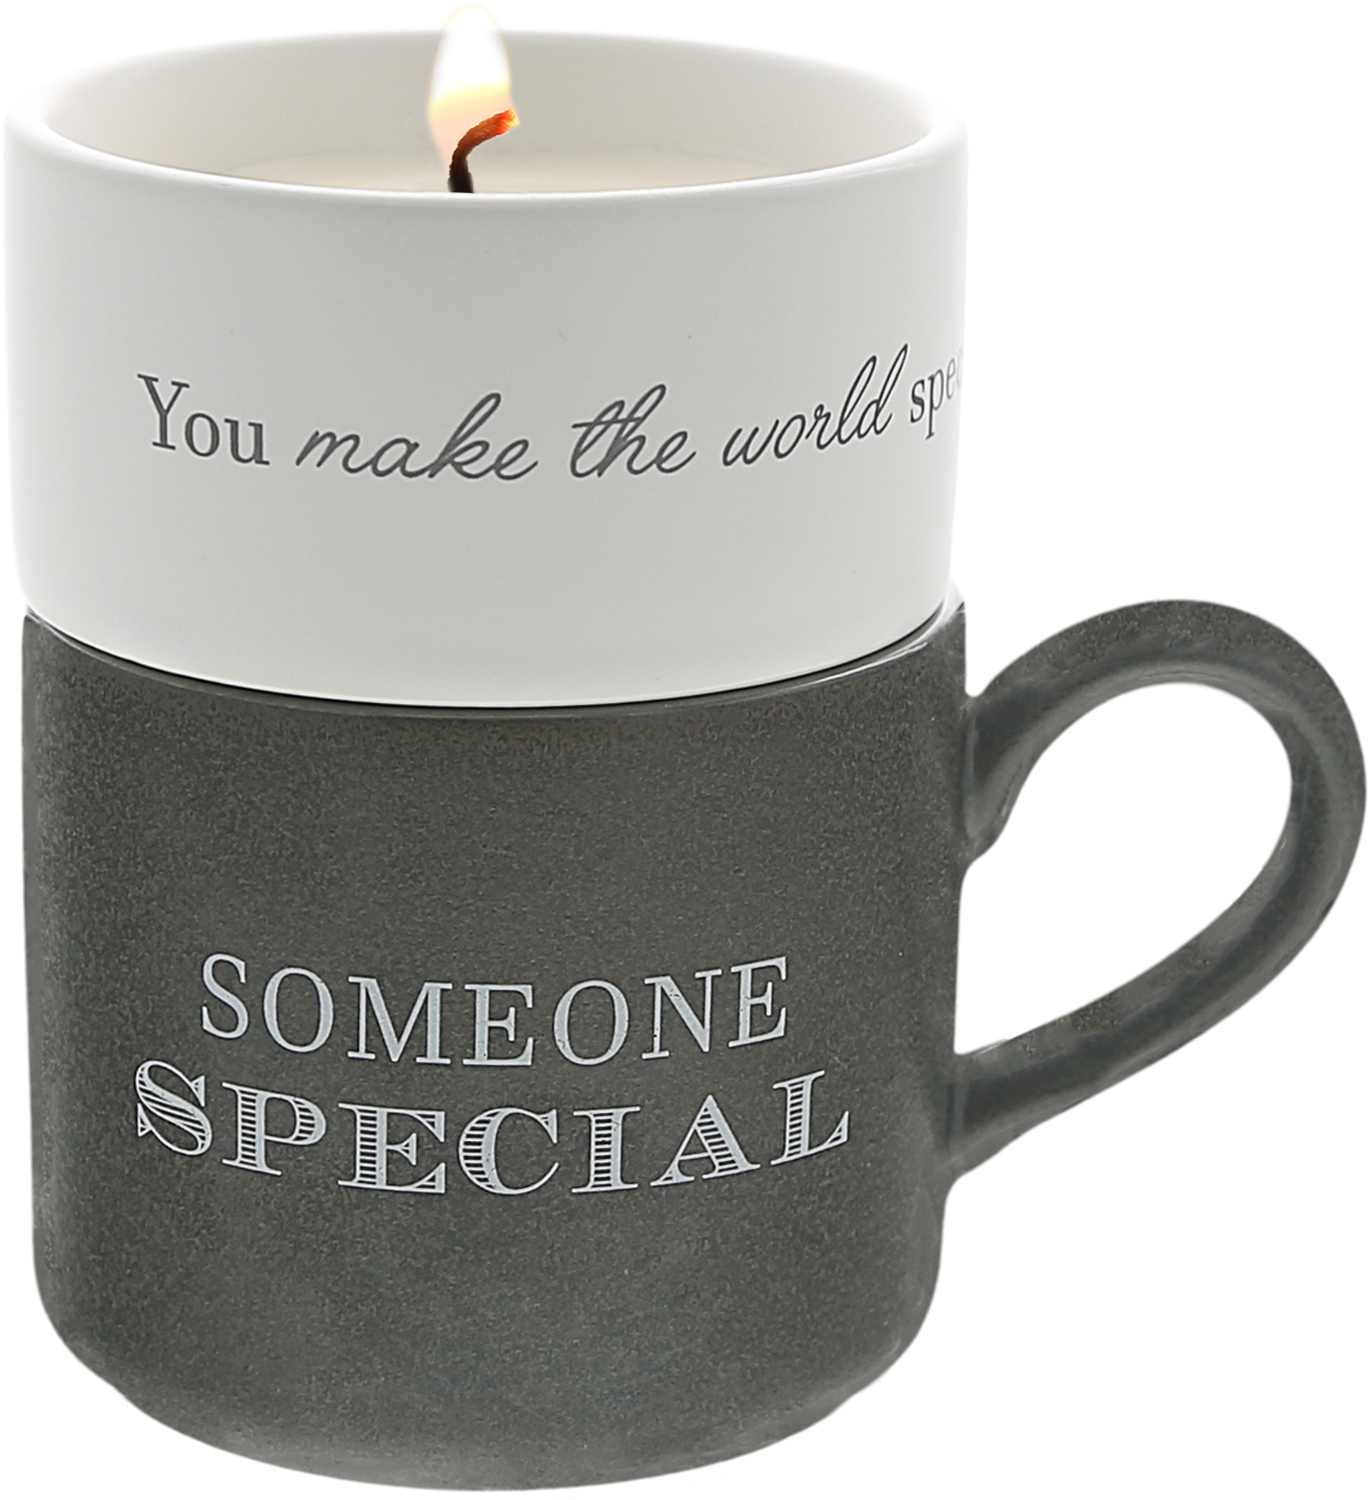 Someone Special by Filled with Warmth - Someone Special - Stacking Mug and Candle Set
100% Soy Wax Scent: Tranquility